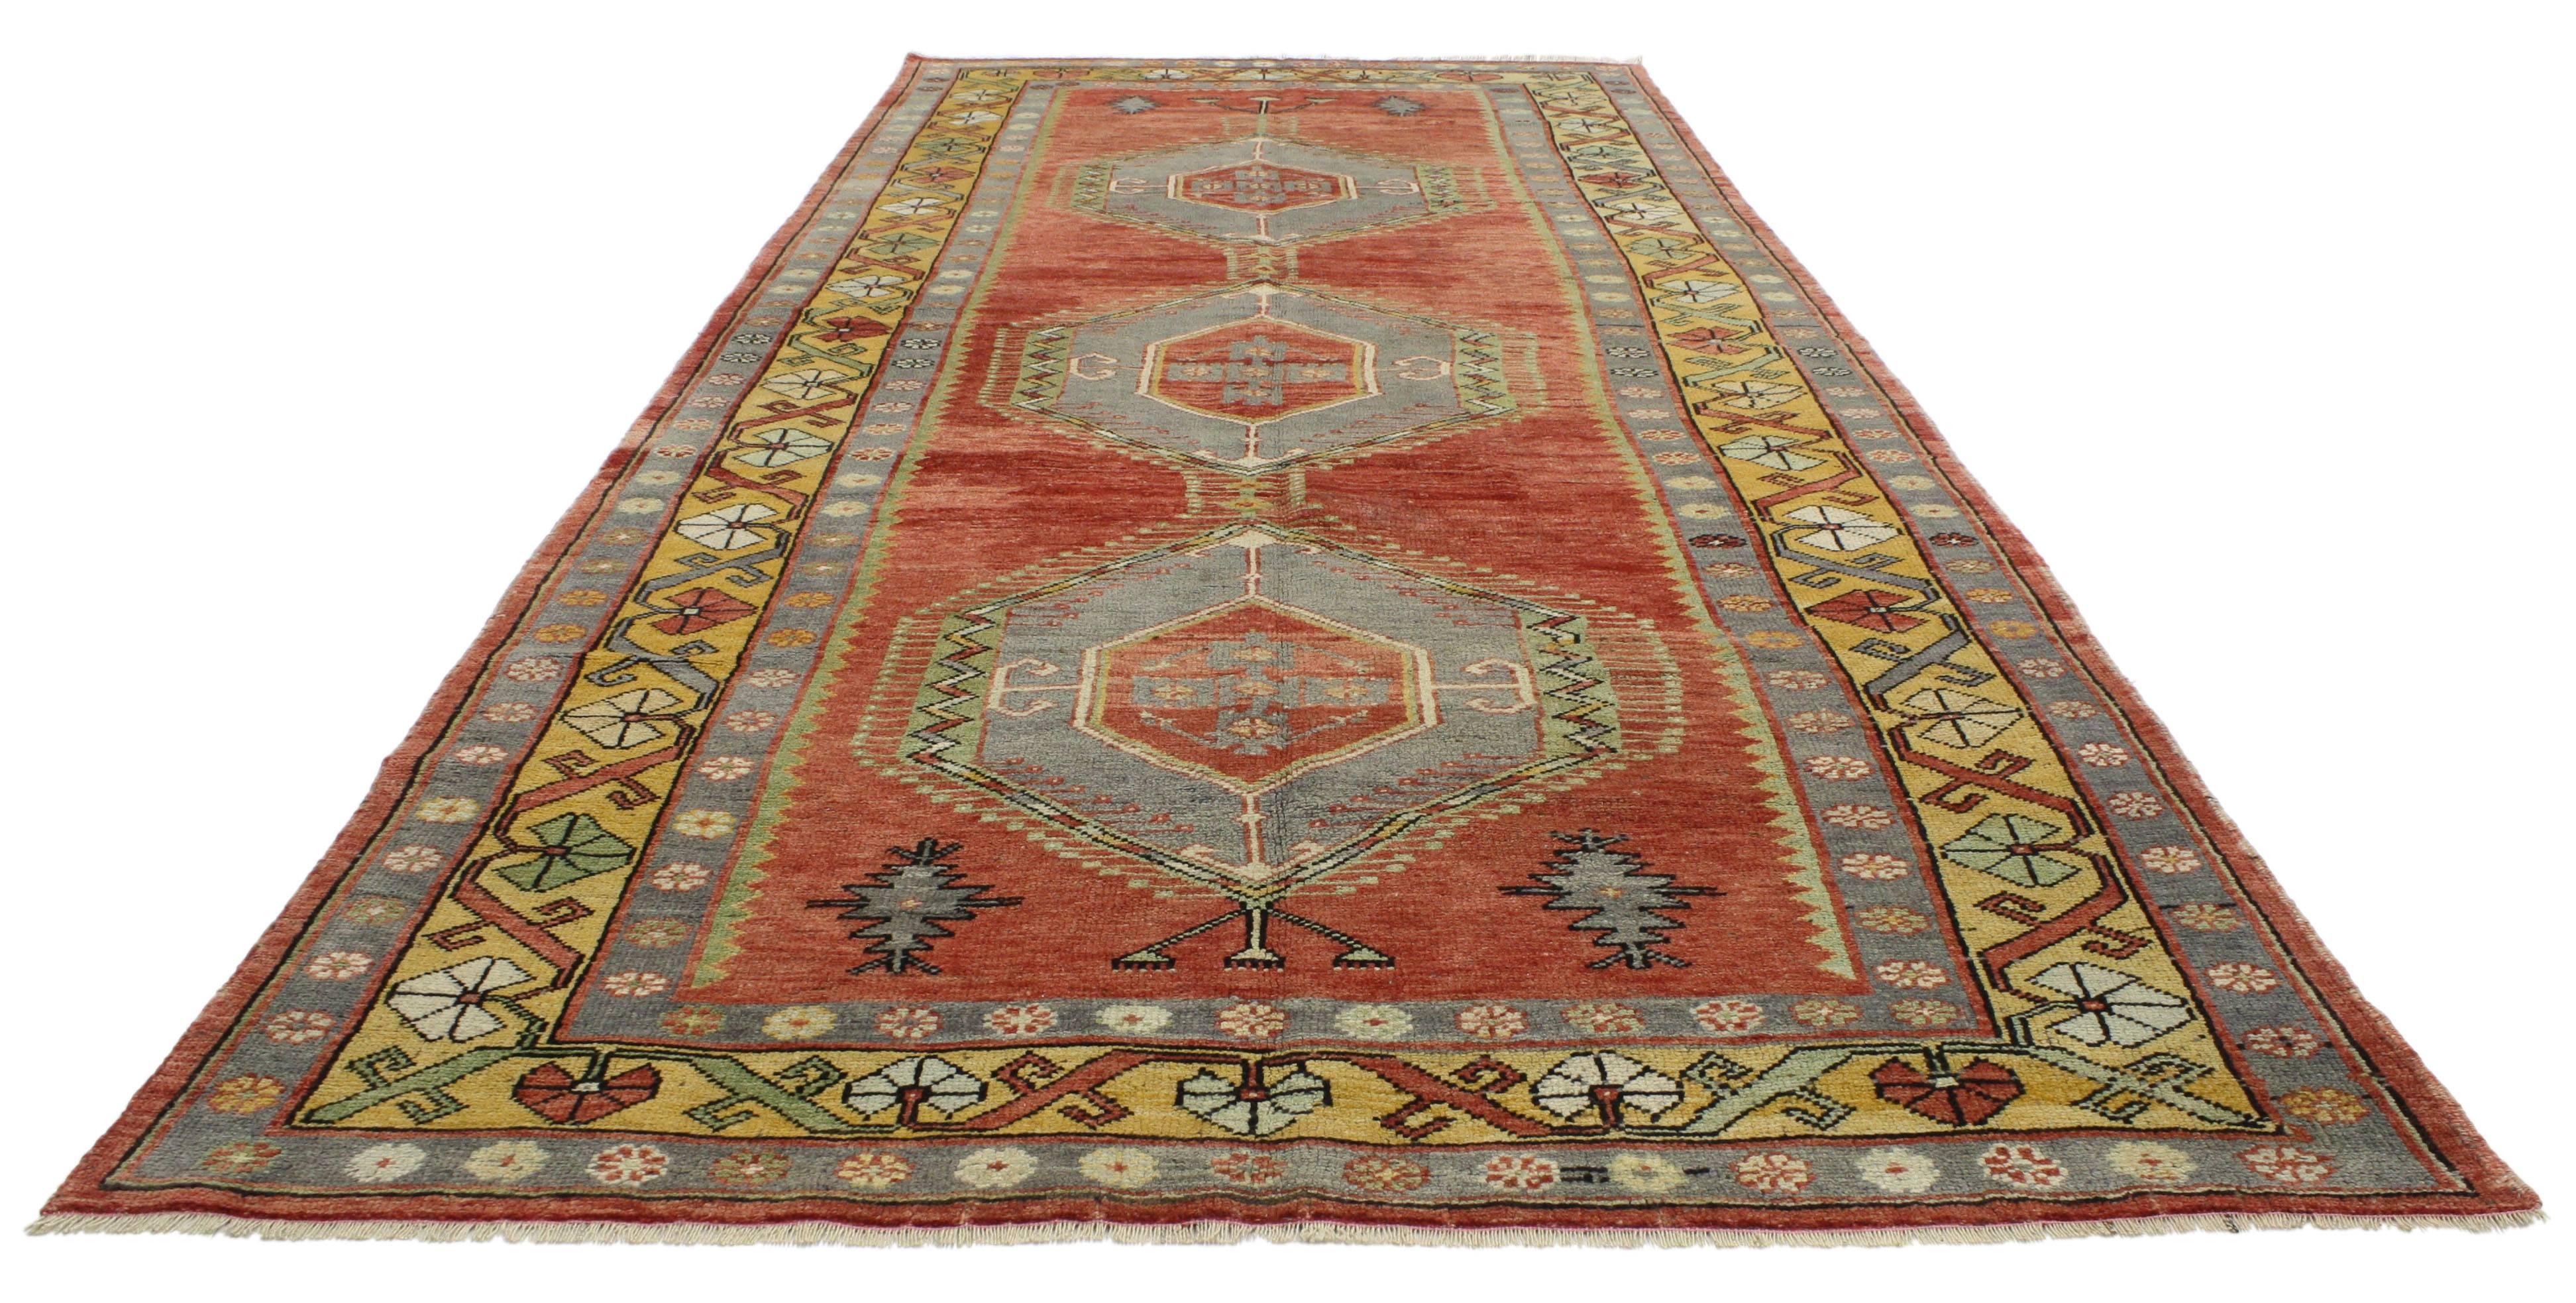 52174 Vintage Turkish Oushak Gallery Rug with Modern Tribal Style, Wide Hallway Runner. This vintage Turkish Oushak runner features a modern tribal style. Immersed in Anatolian history and rich waves of abrash, this Oushak runner combines simplicity